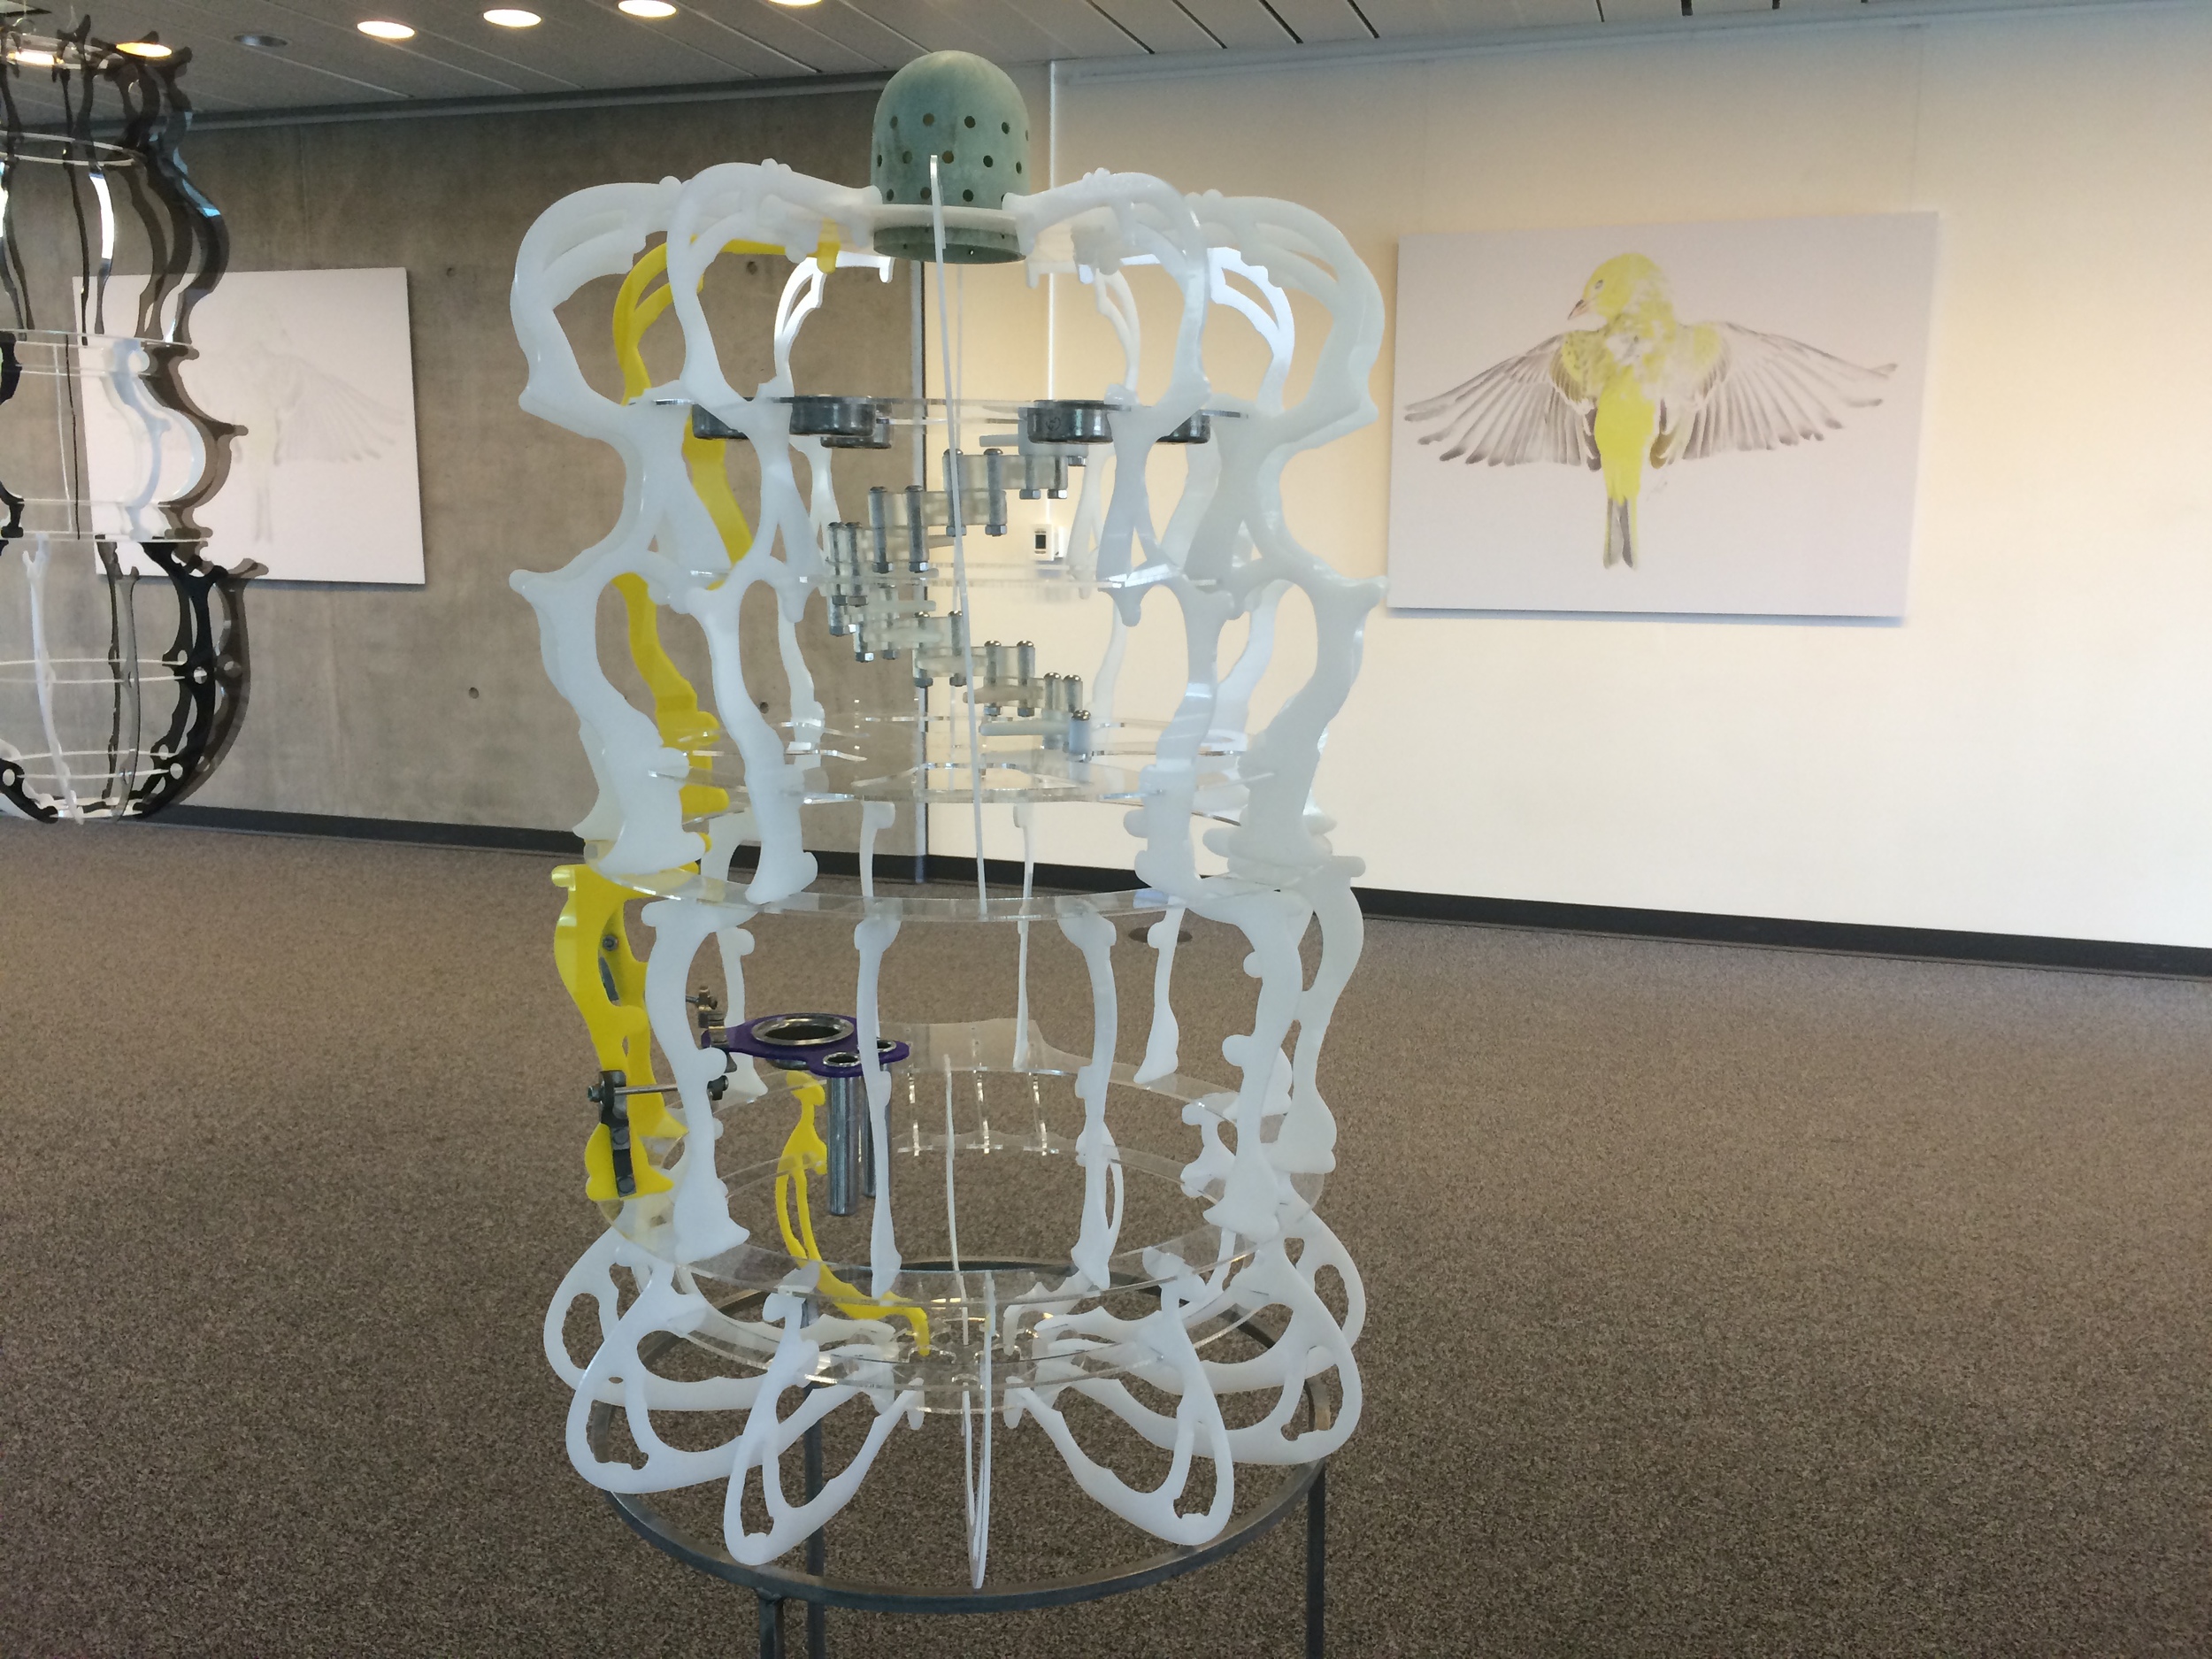  A collaboration between Matthew and Monica Furmanski.  Installed at CSU, Channel Islands  Curated by Irina D. Costache  2015 